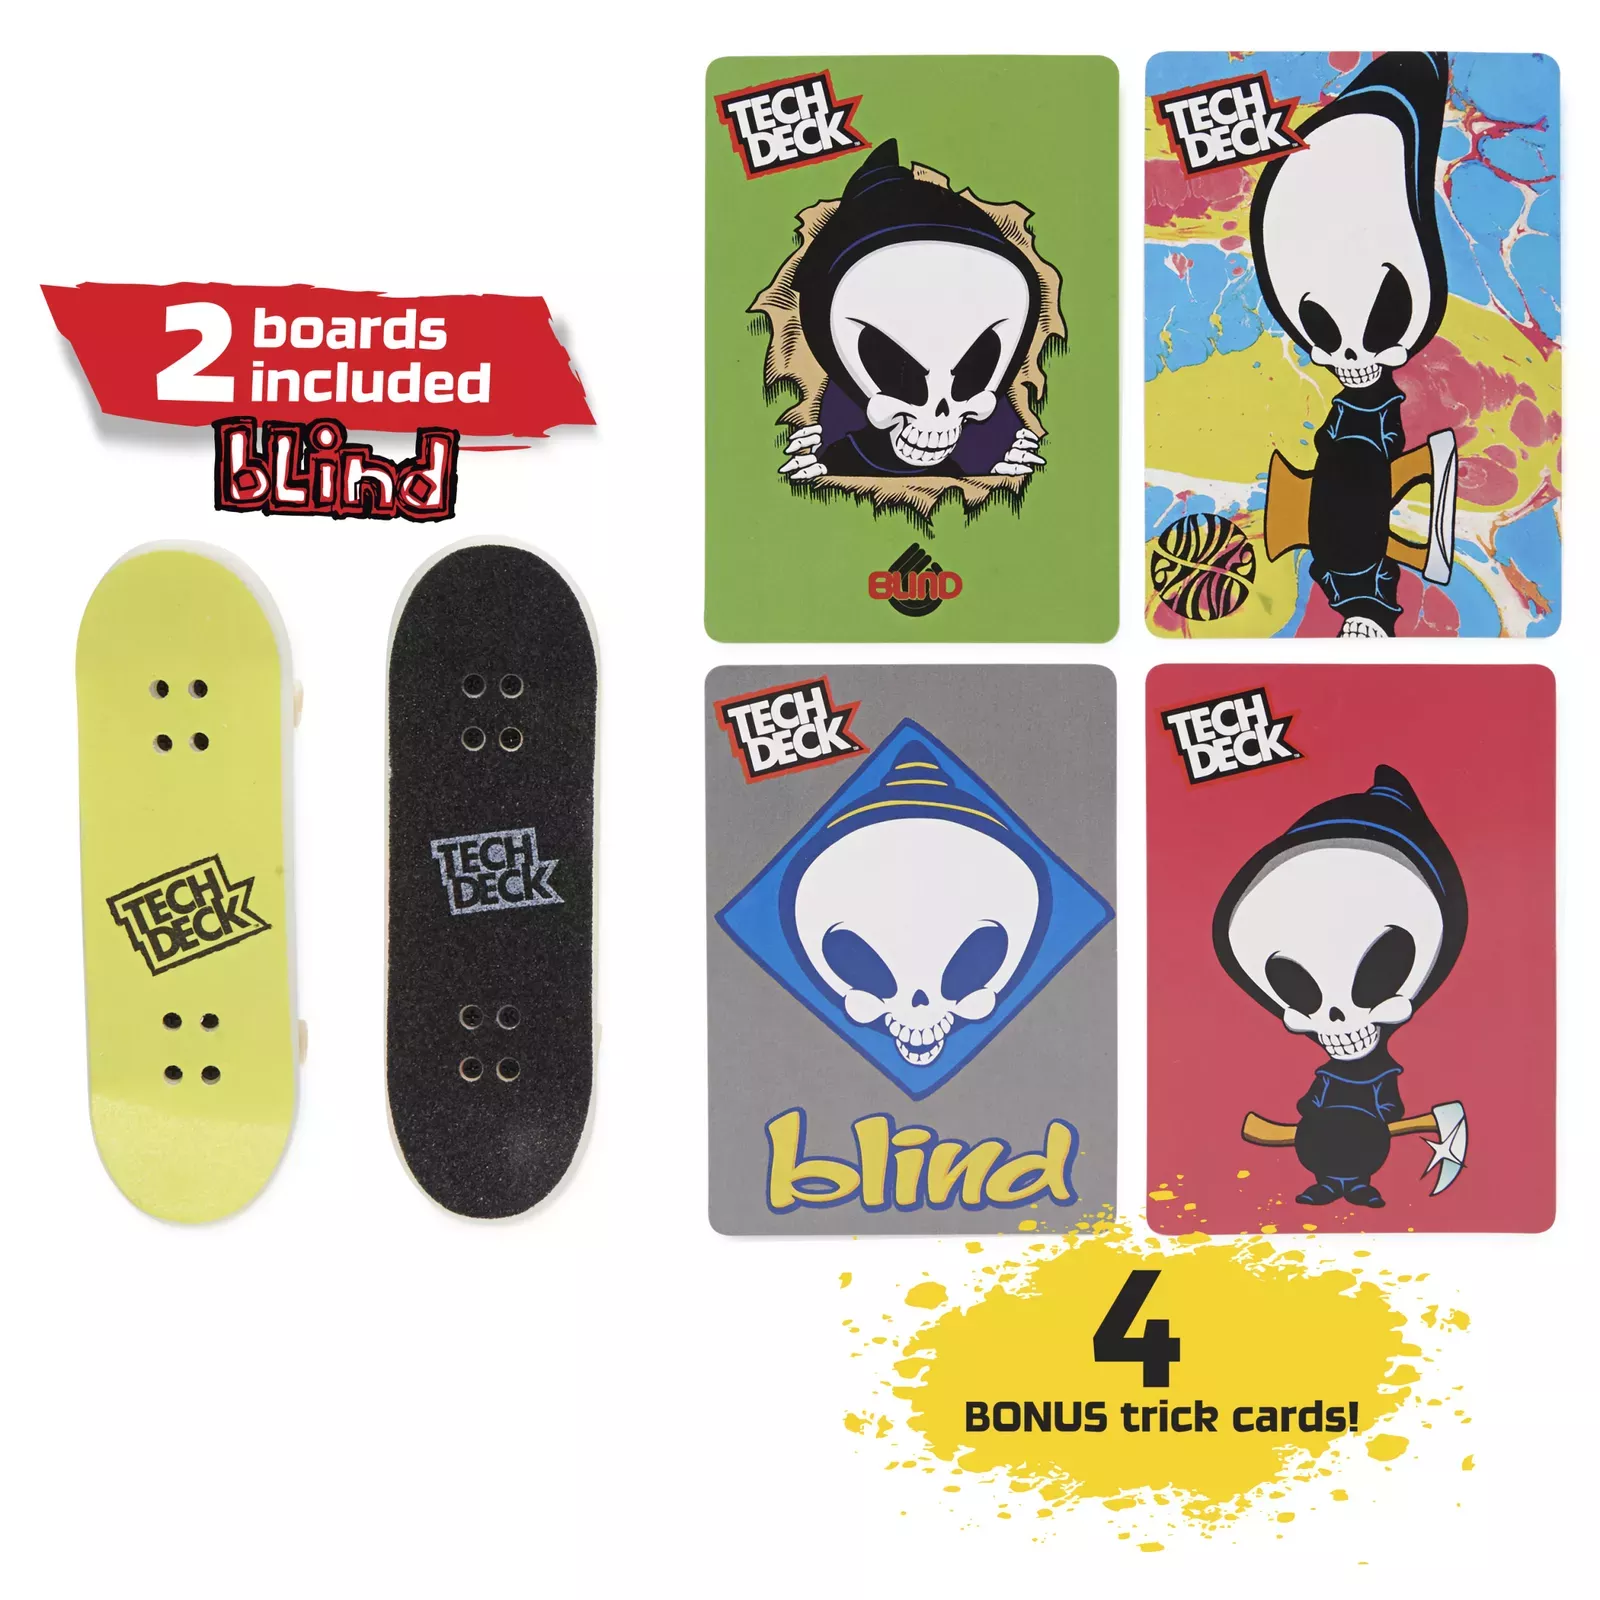 Tech Deck, Neon Mega Park X-Connect Creator, Customizable Glow-in-the-Dark  Ramp Set with 2 Blind Skateboard Fingerboards, 90+ Pieces, Gift for Ages 6+